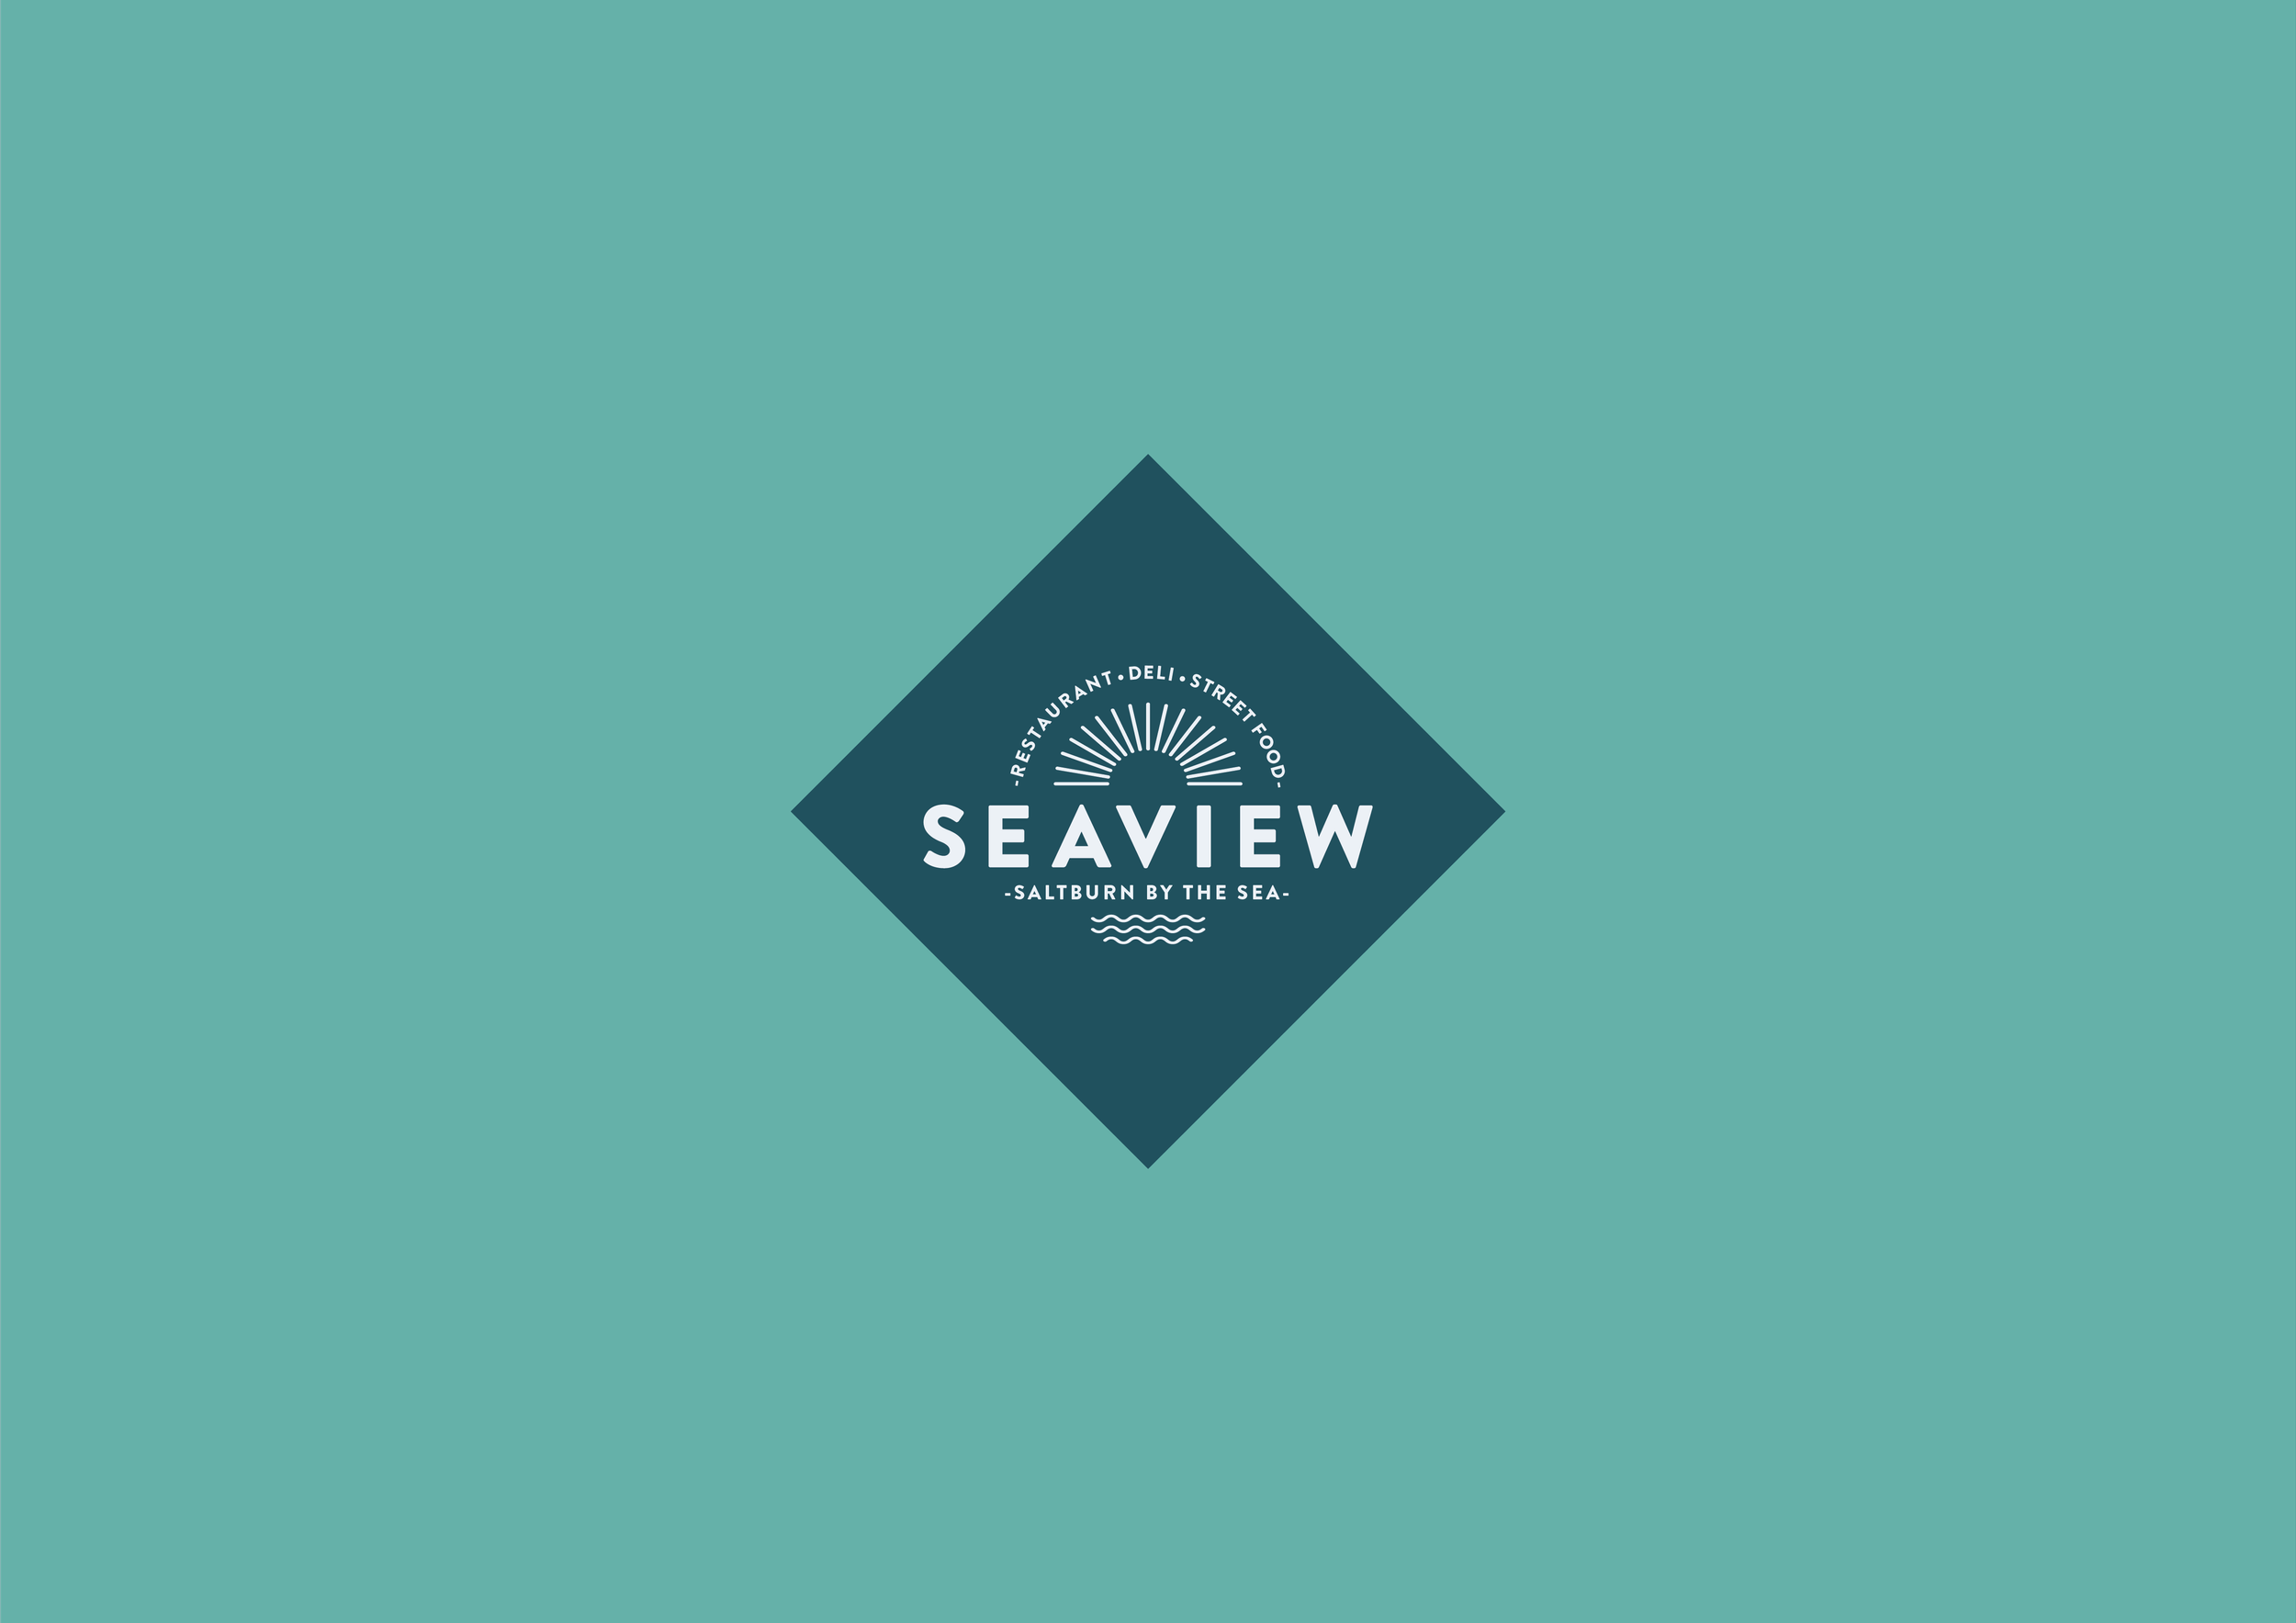 Custom Logo Design For Yorkshire Based Seafood Restaurant - Logo In Navy Blue With Icon Design